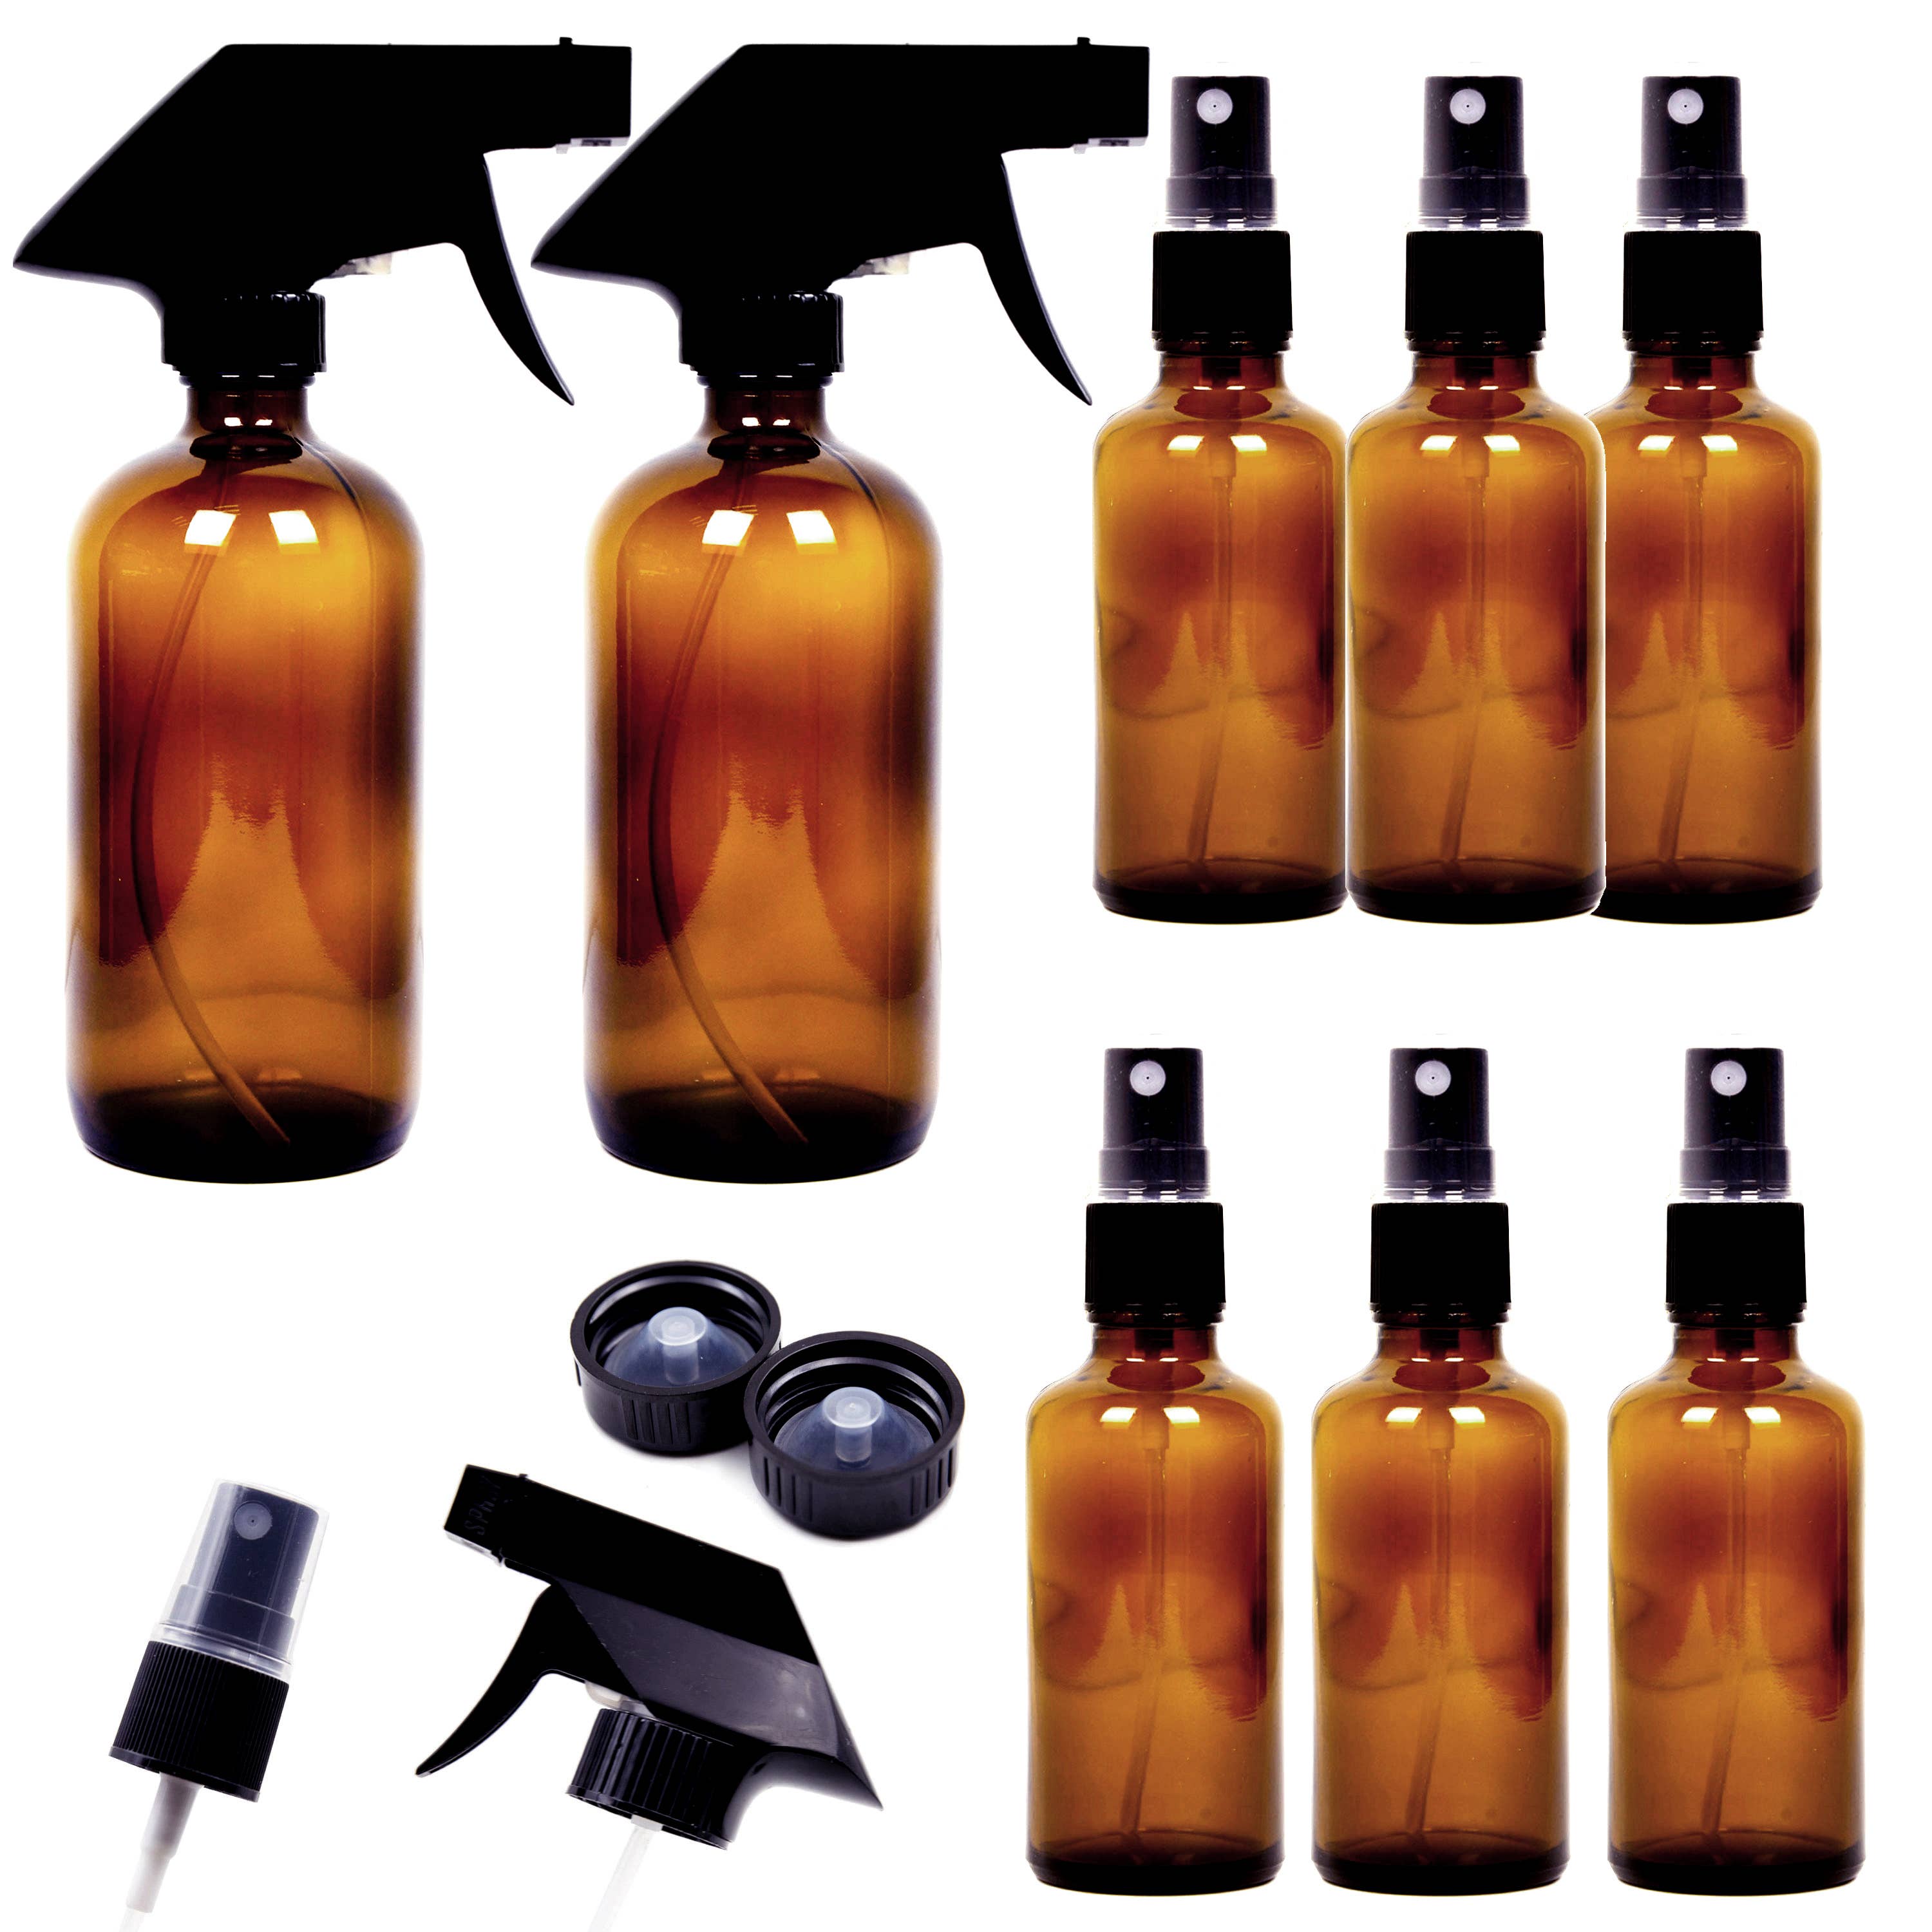 Cleaning Products Durable Black Trigger Sprayer Fine Mist and Stream 16 oz 8 oz 4 oz Spray Bottles for Essential Oils Youngever 6 Pack Empty Cobalt Blue Glass Spray Bottles Refillable Containers 